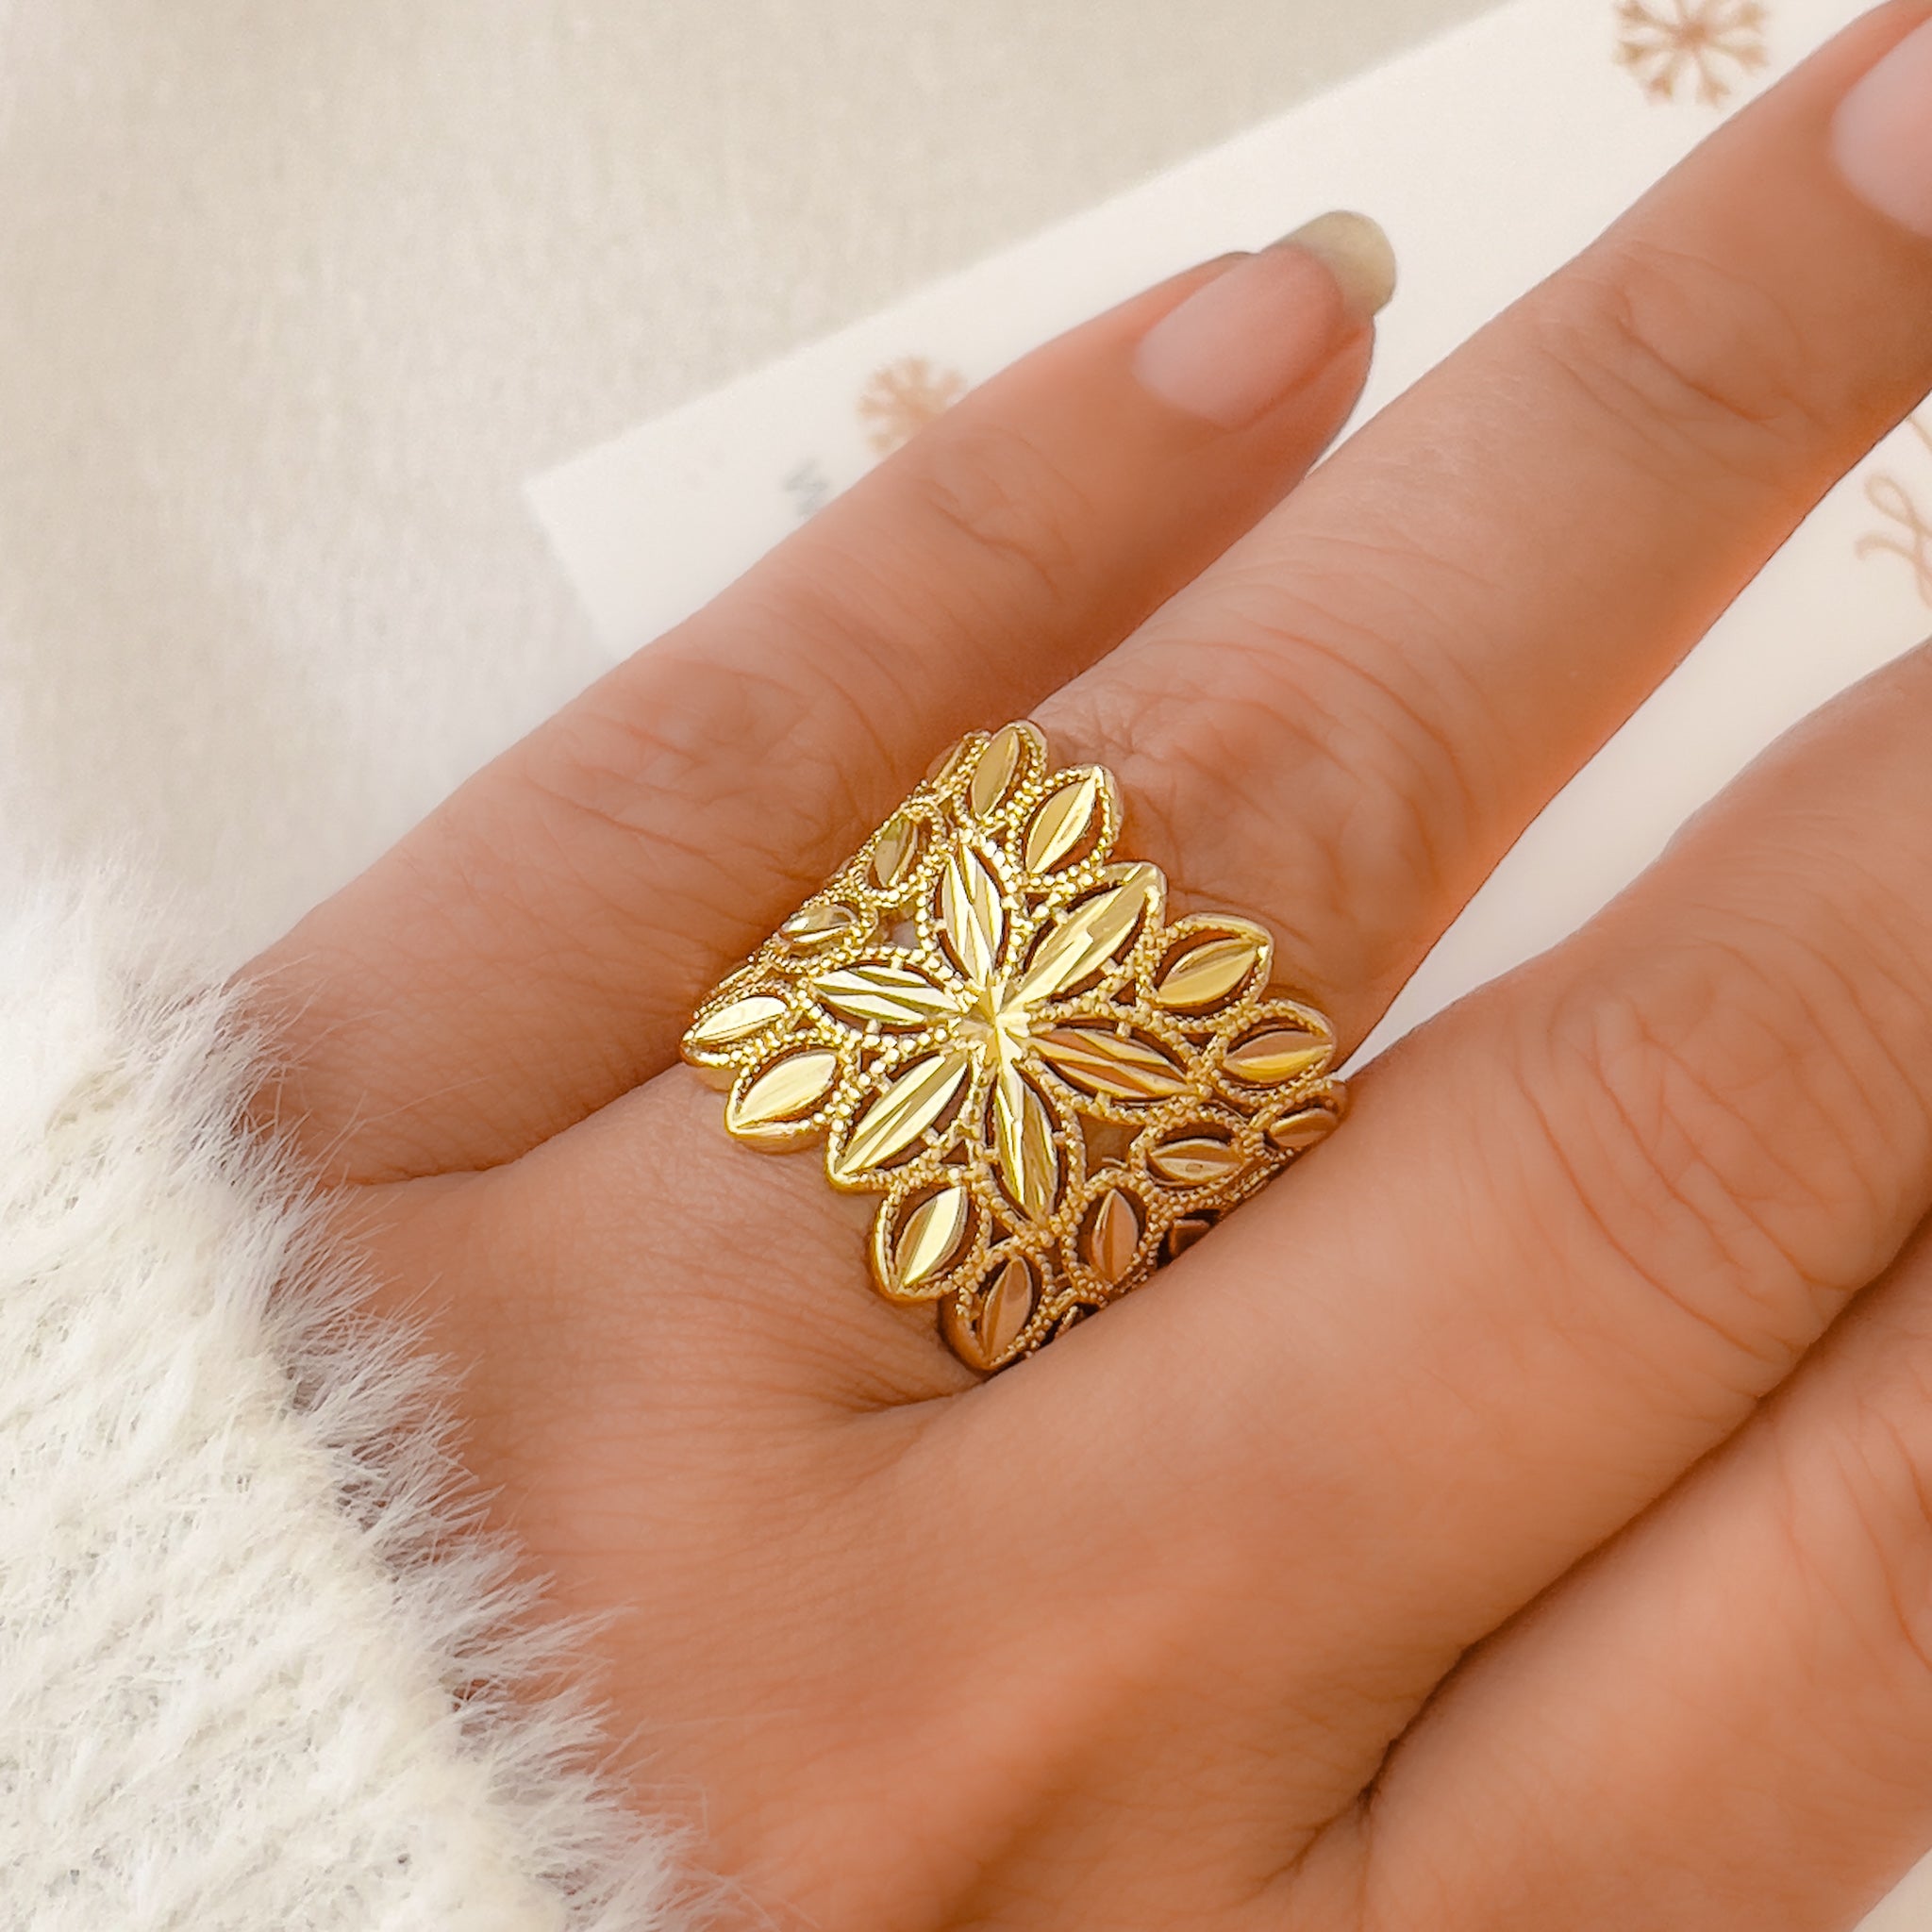 GOLD RINGS | TRIBAL ORNAMENTS